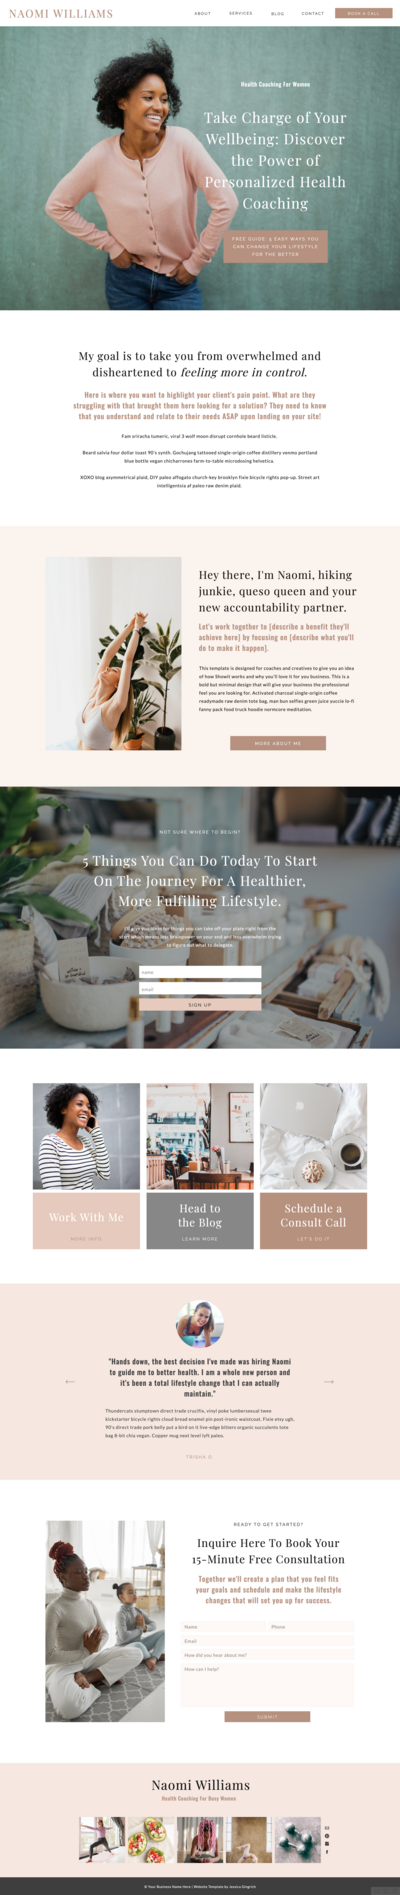 Free-Showit-Template-Naomi-Williams